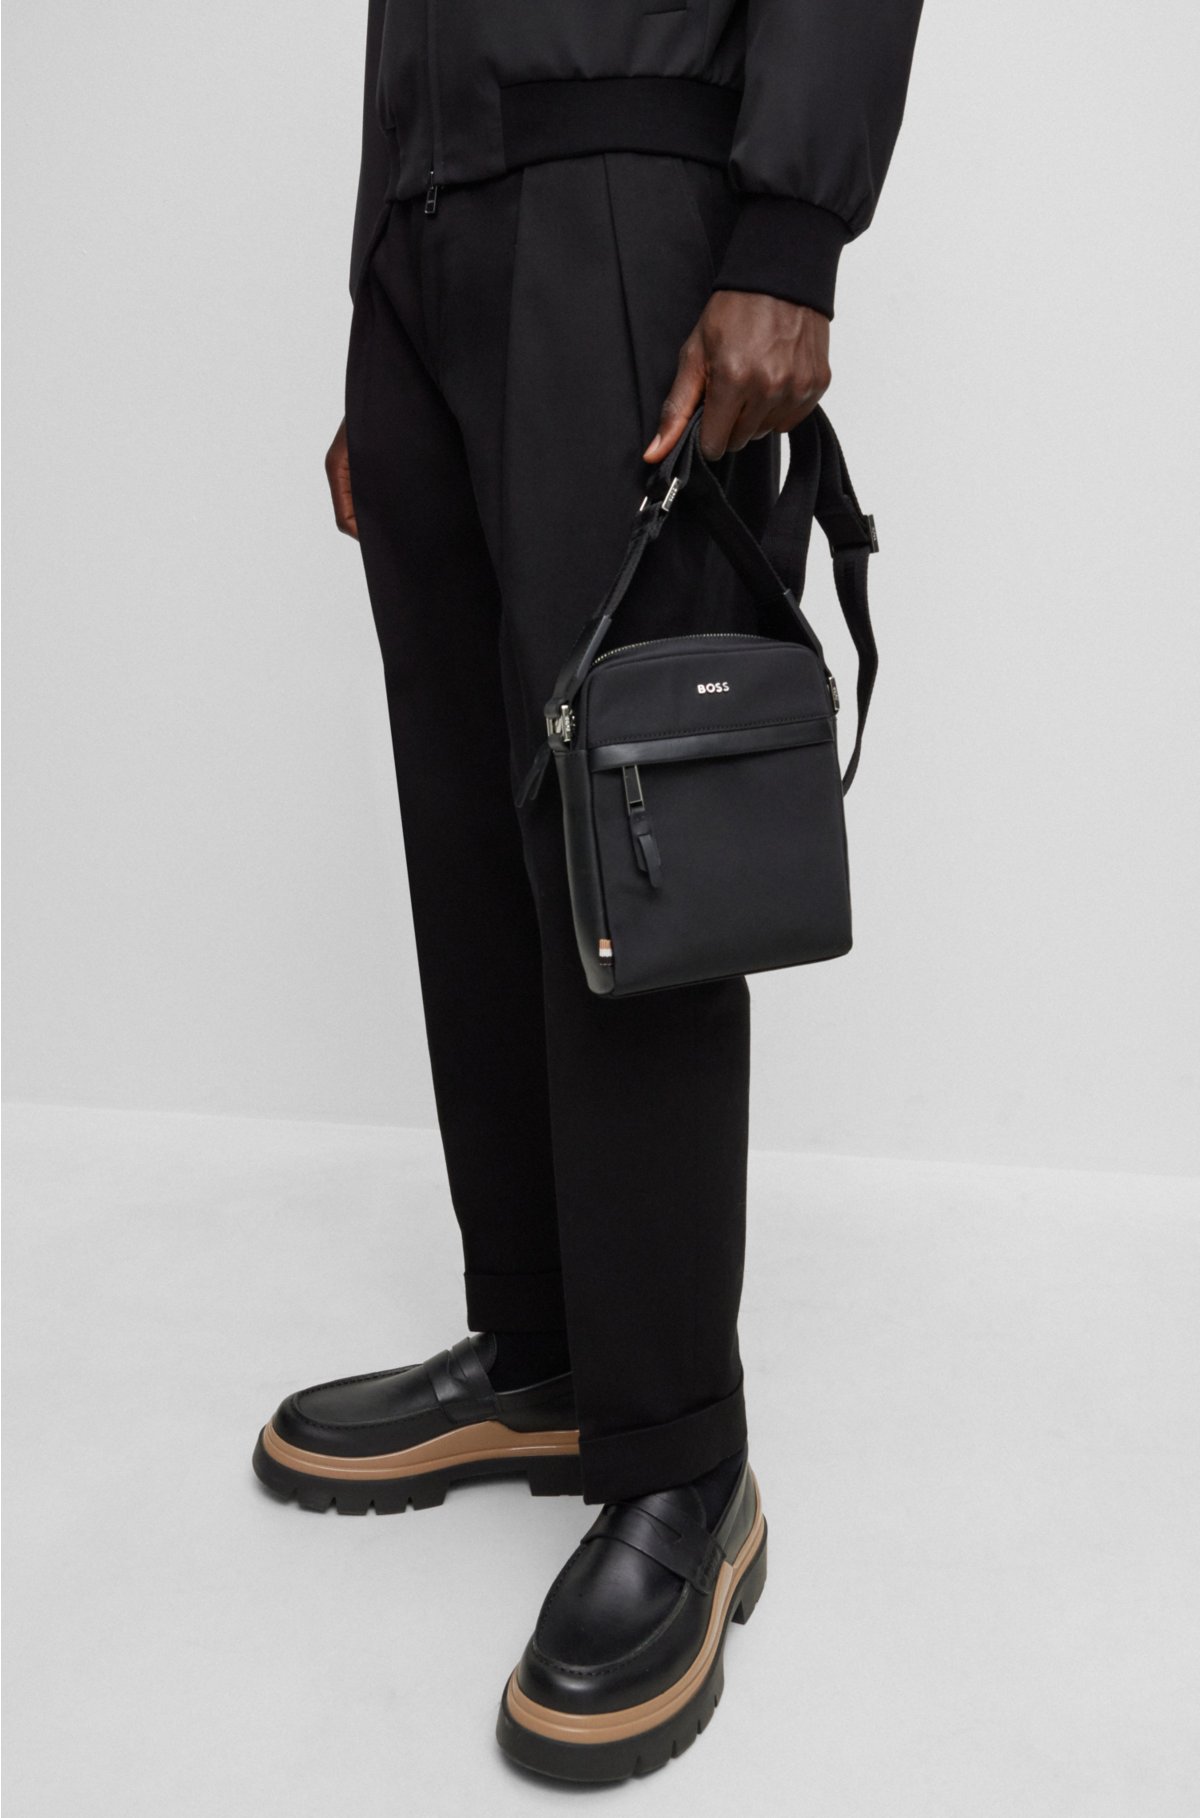 BOSS logo with Structured-material reporter bag - lettering